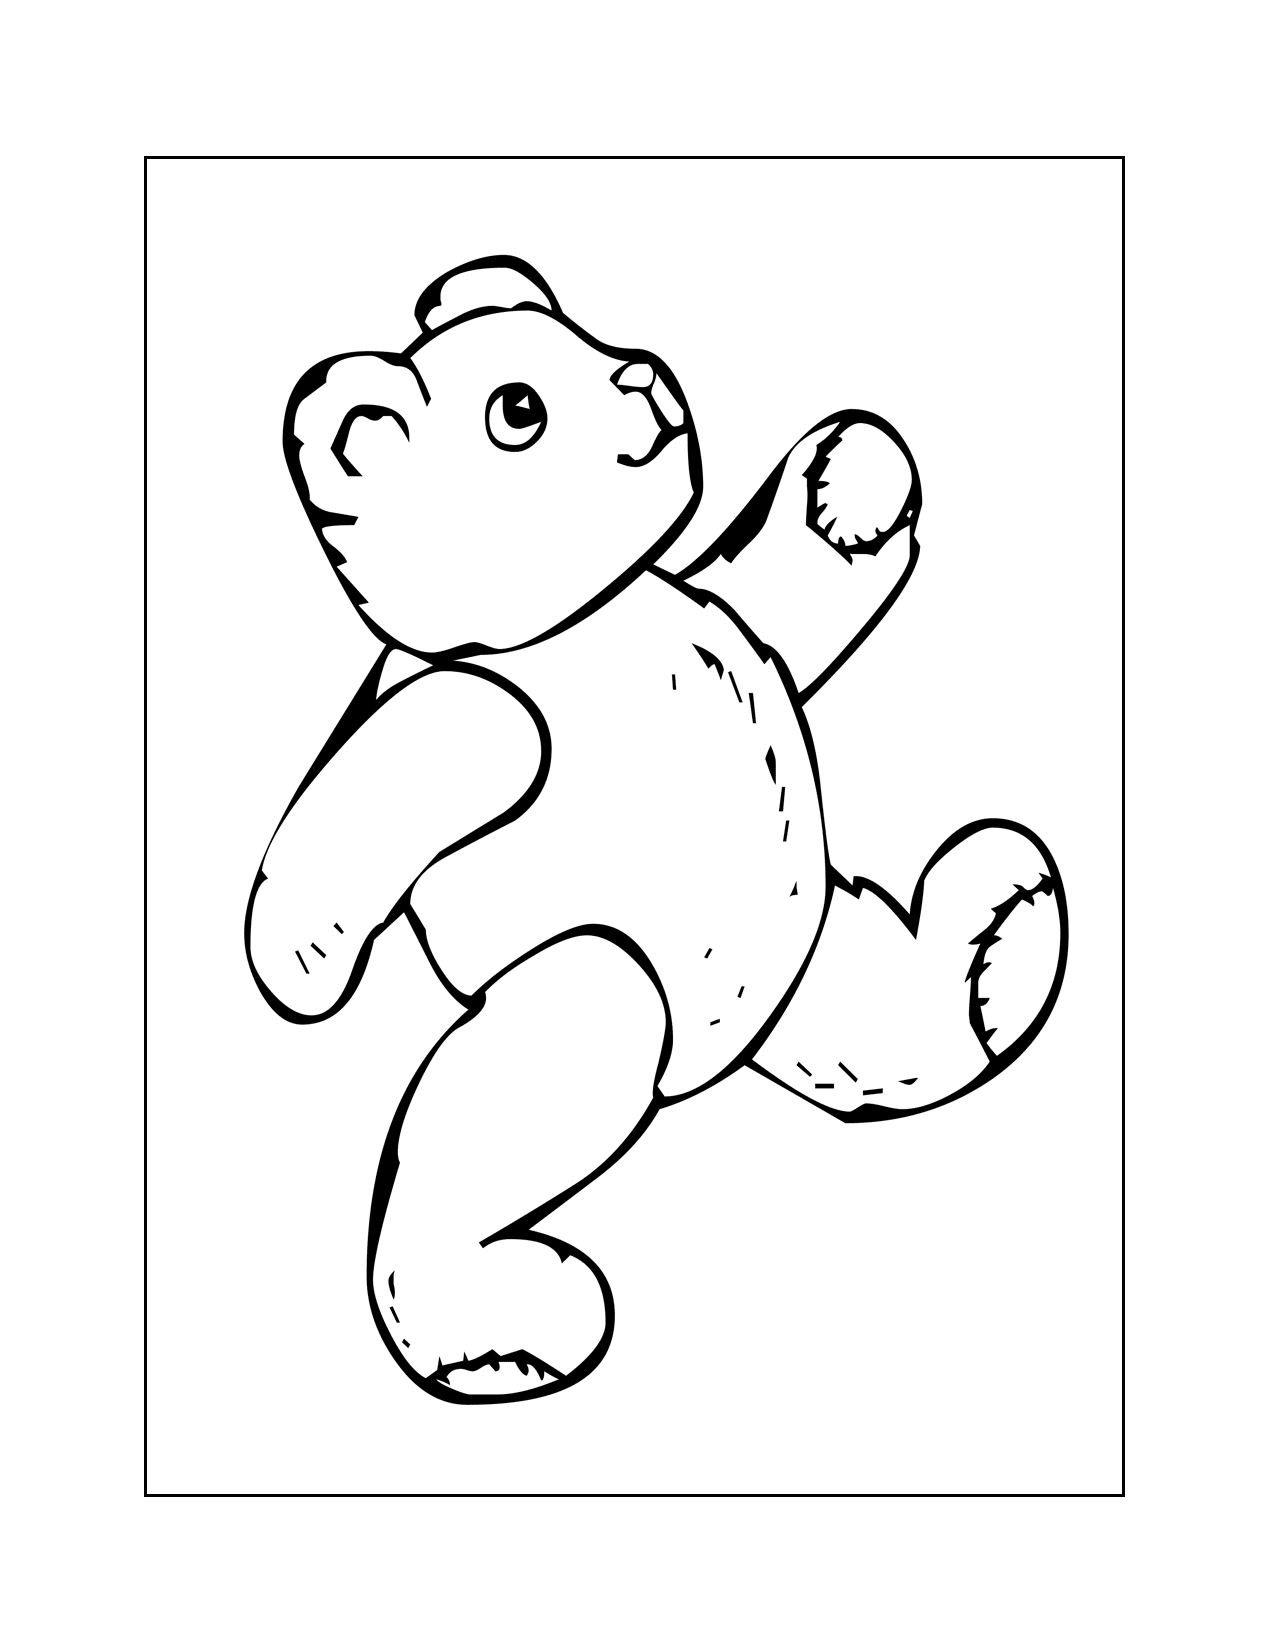 Marching Teddy Bear Coloring Page